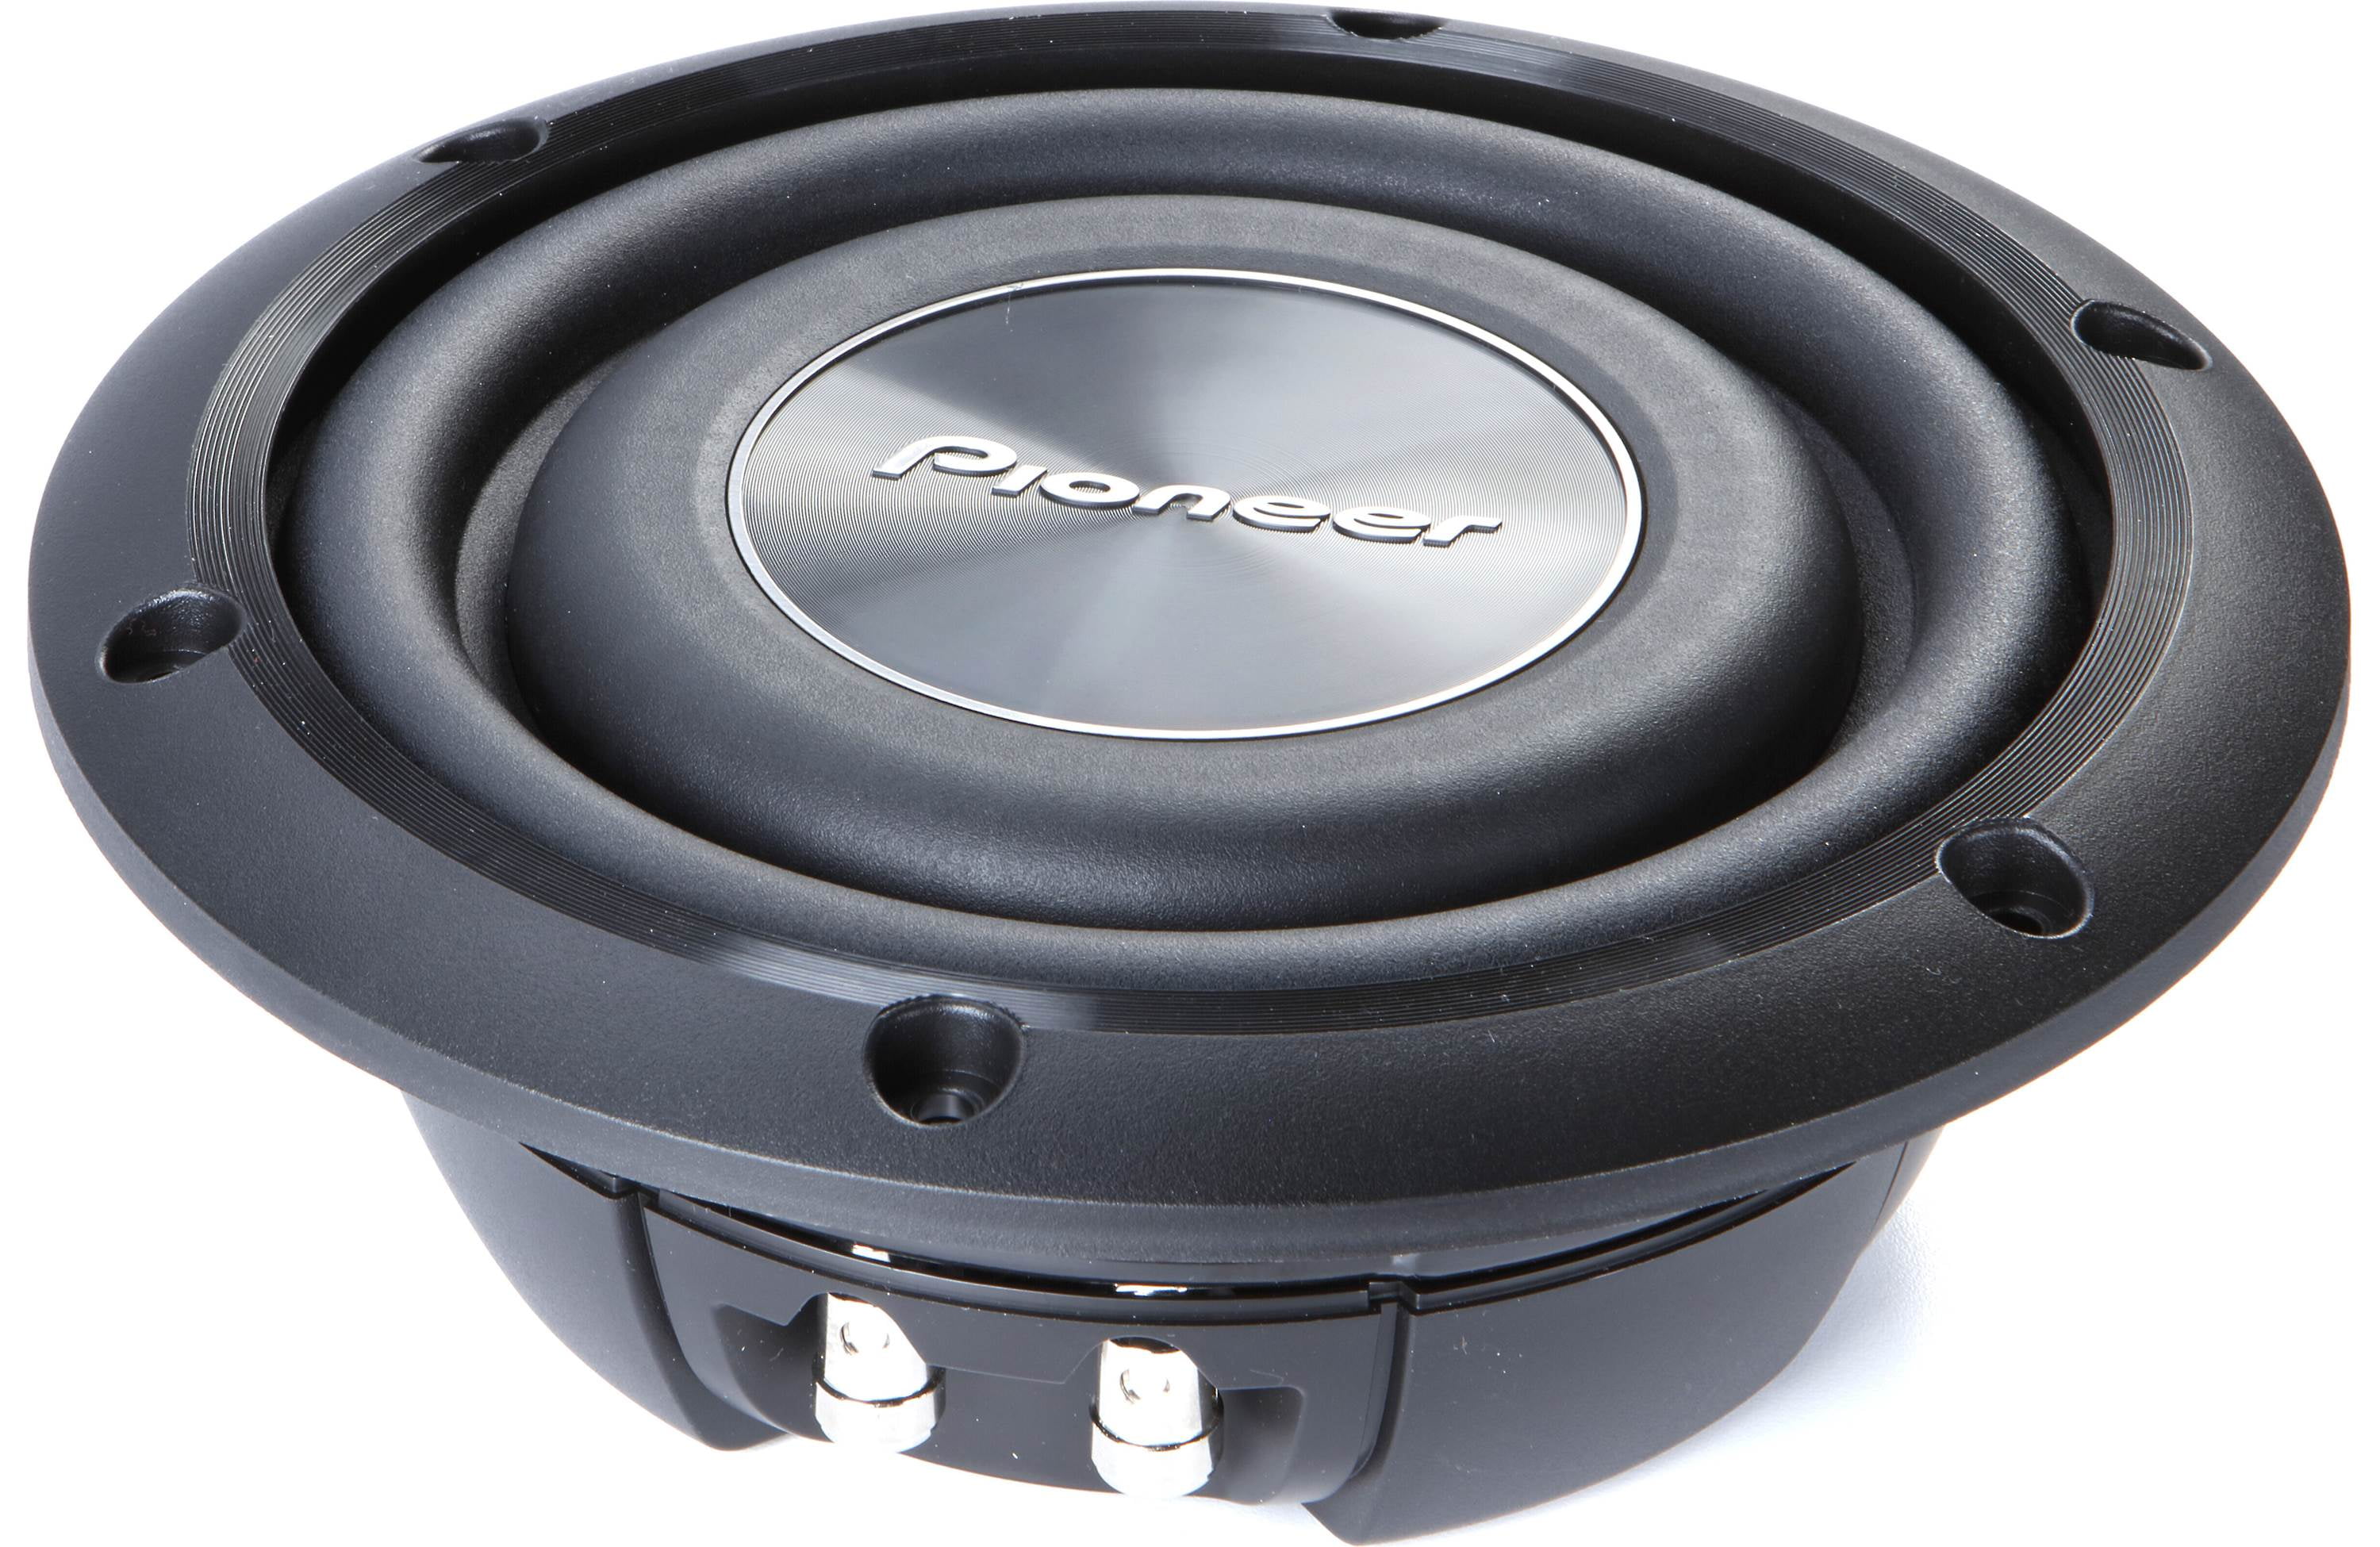 Pioneer - 8-inch Shallow-Mount Subwoofer with 700 Watts - Walmart.com